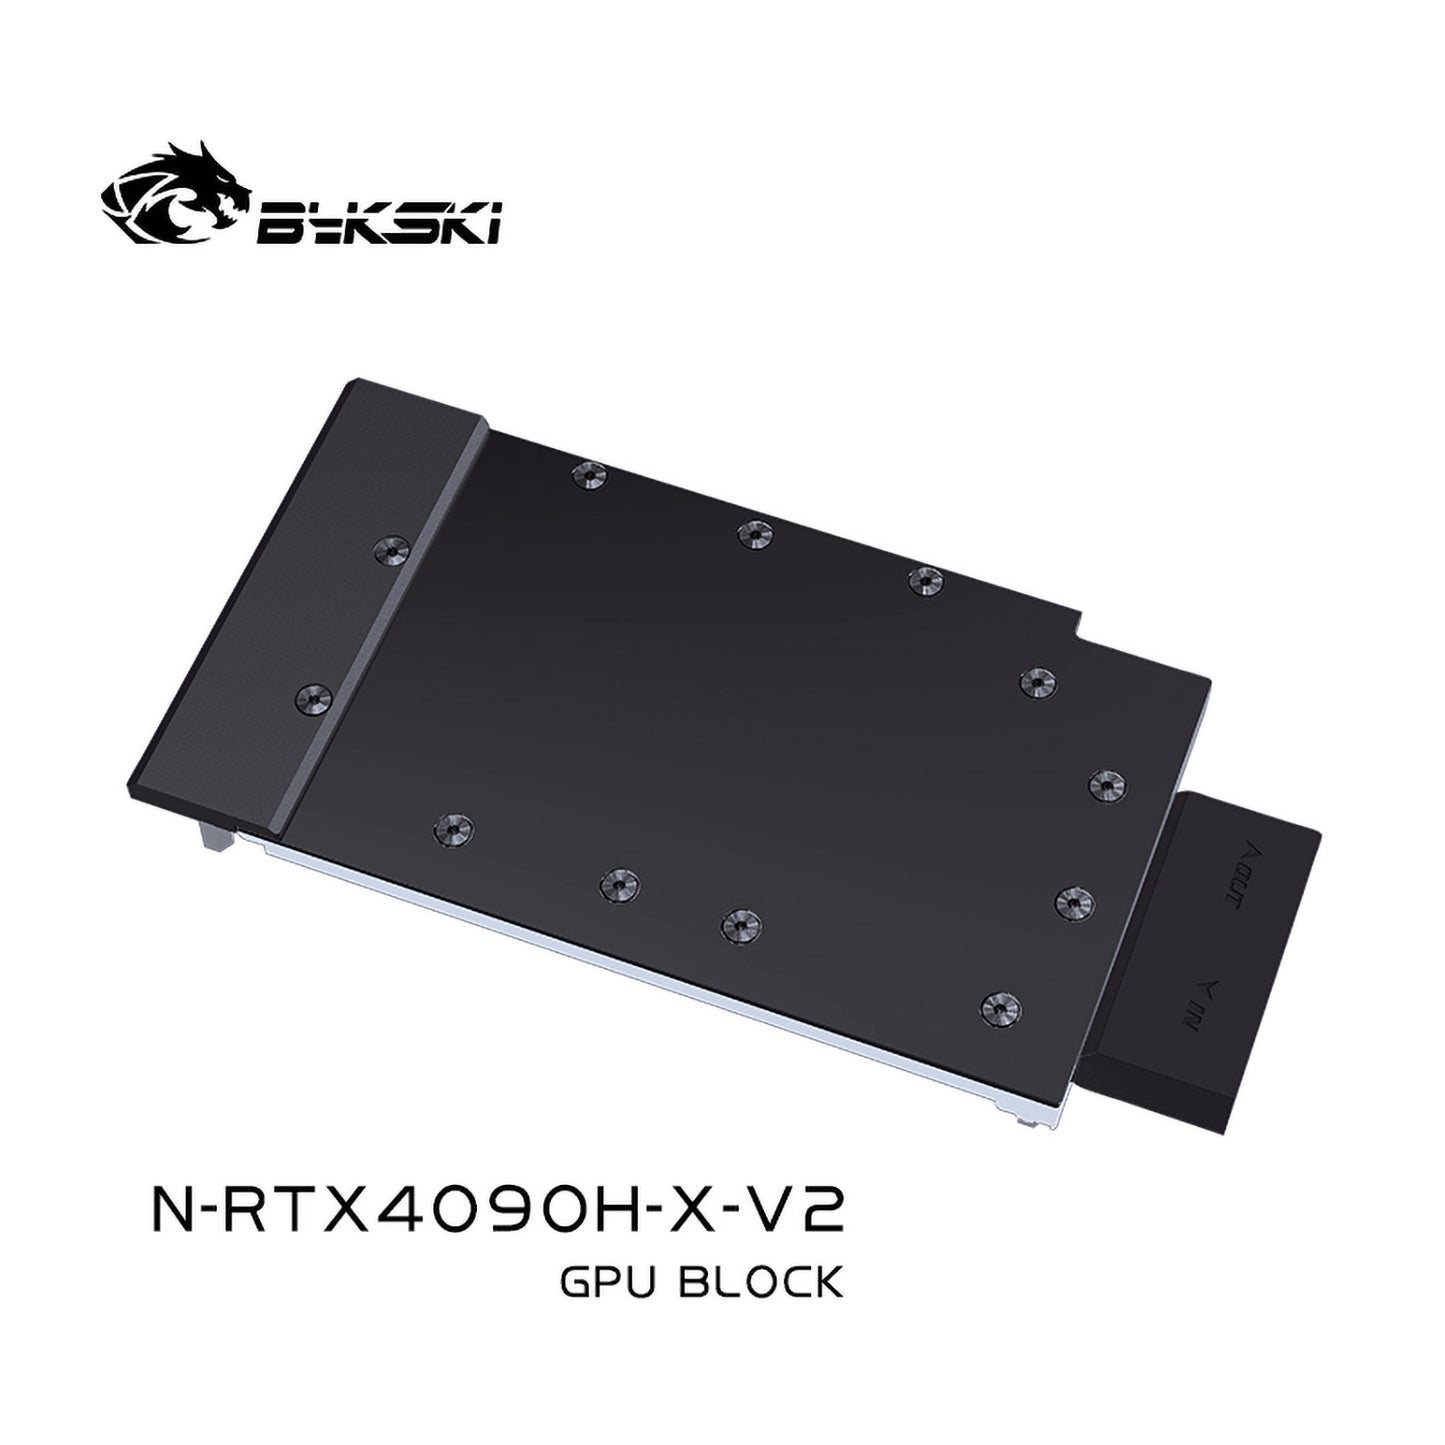 Bykski GPU Block For Nvidia RTX 4090 AIC (Reference), High Heat Resistance Material POM + Full Metal Construction, With Backplate Full Cover GPU Water Cooling Cooler Radiator Block, N-RTX4090H-X-V2